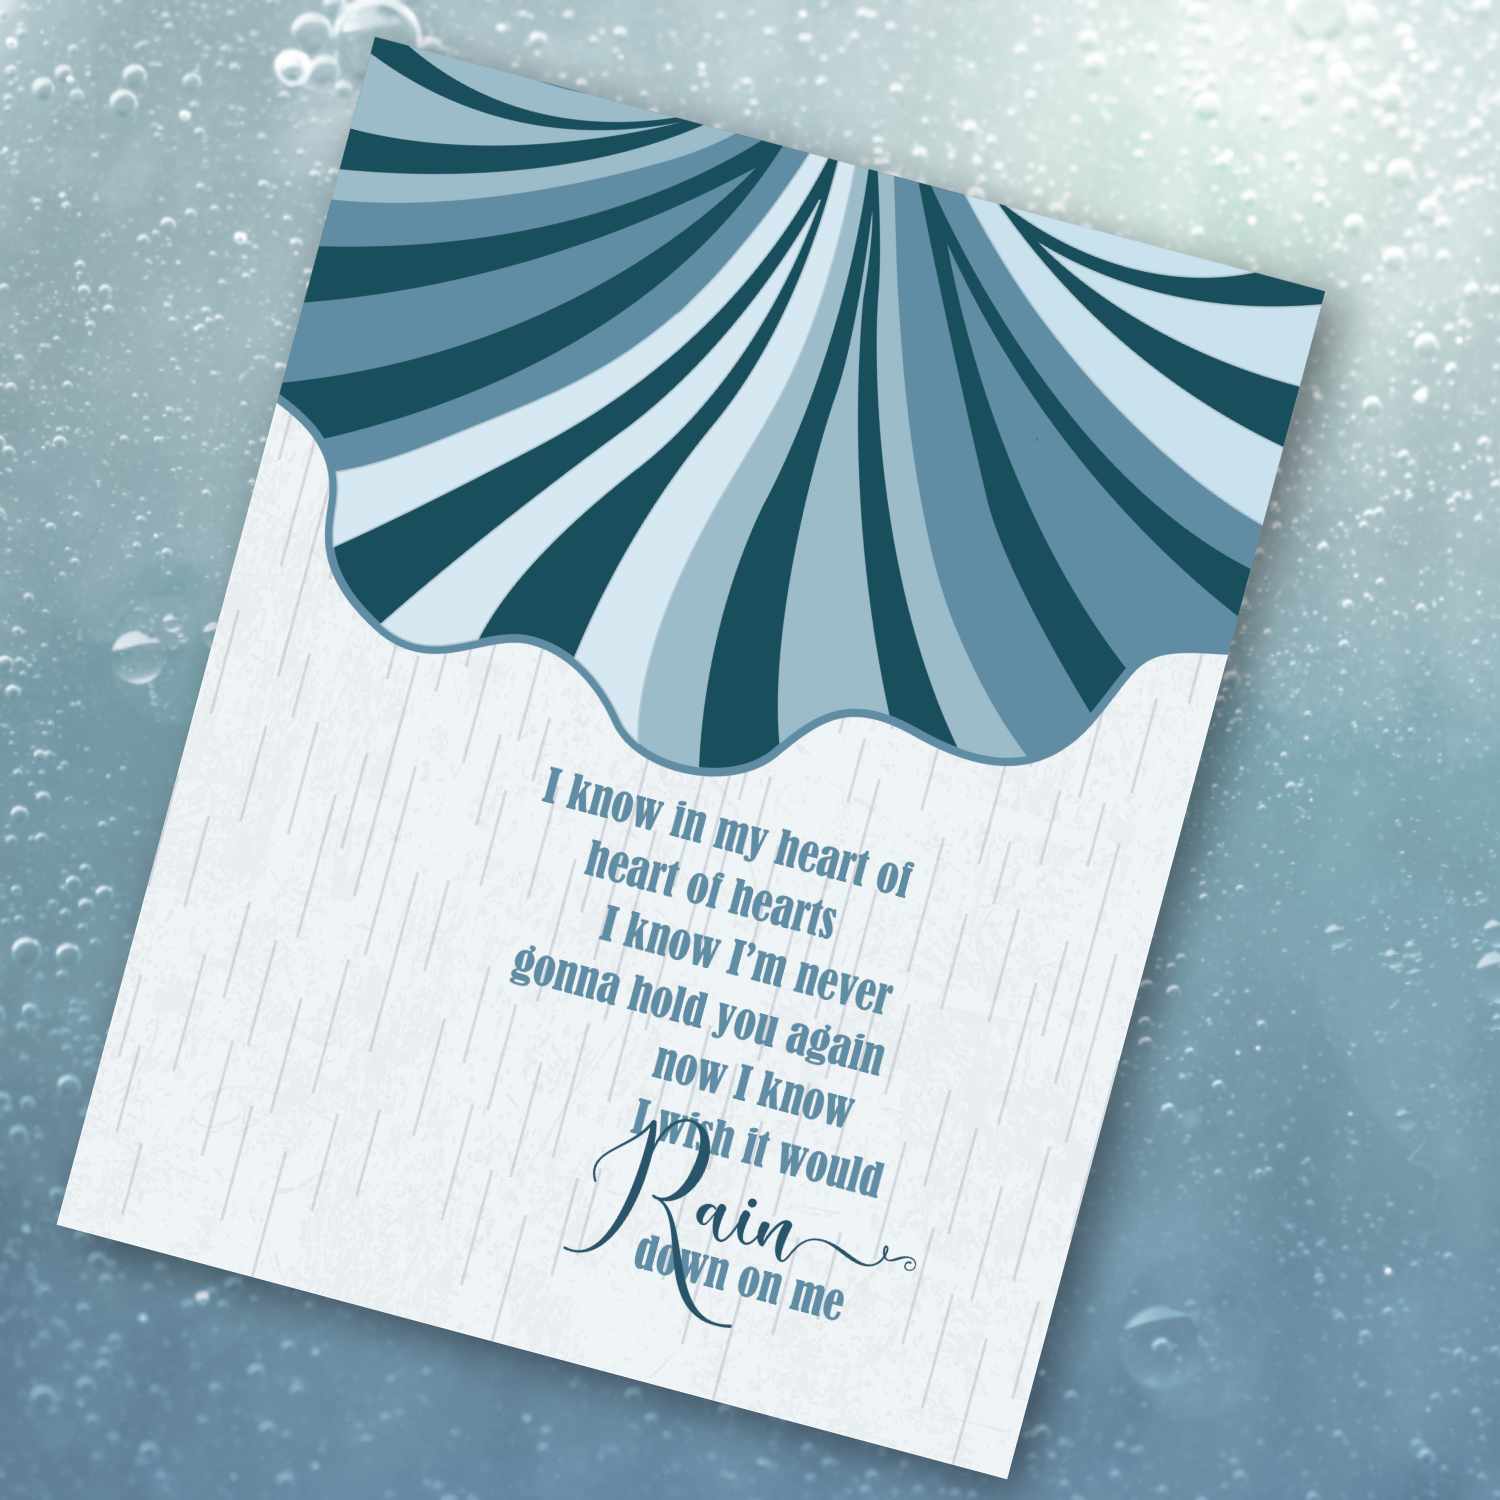 I Wish it Would Rain Down by Phil Collins - Song Lyric Poster Song Lyrics Art Song Lyrics Art 8x10 Unframed Print 